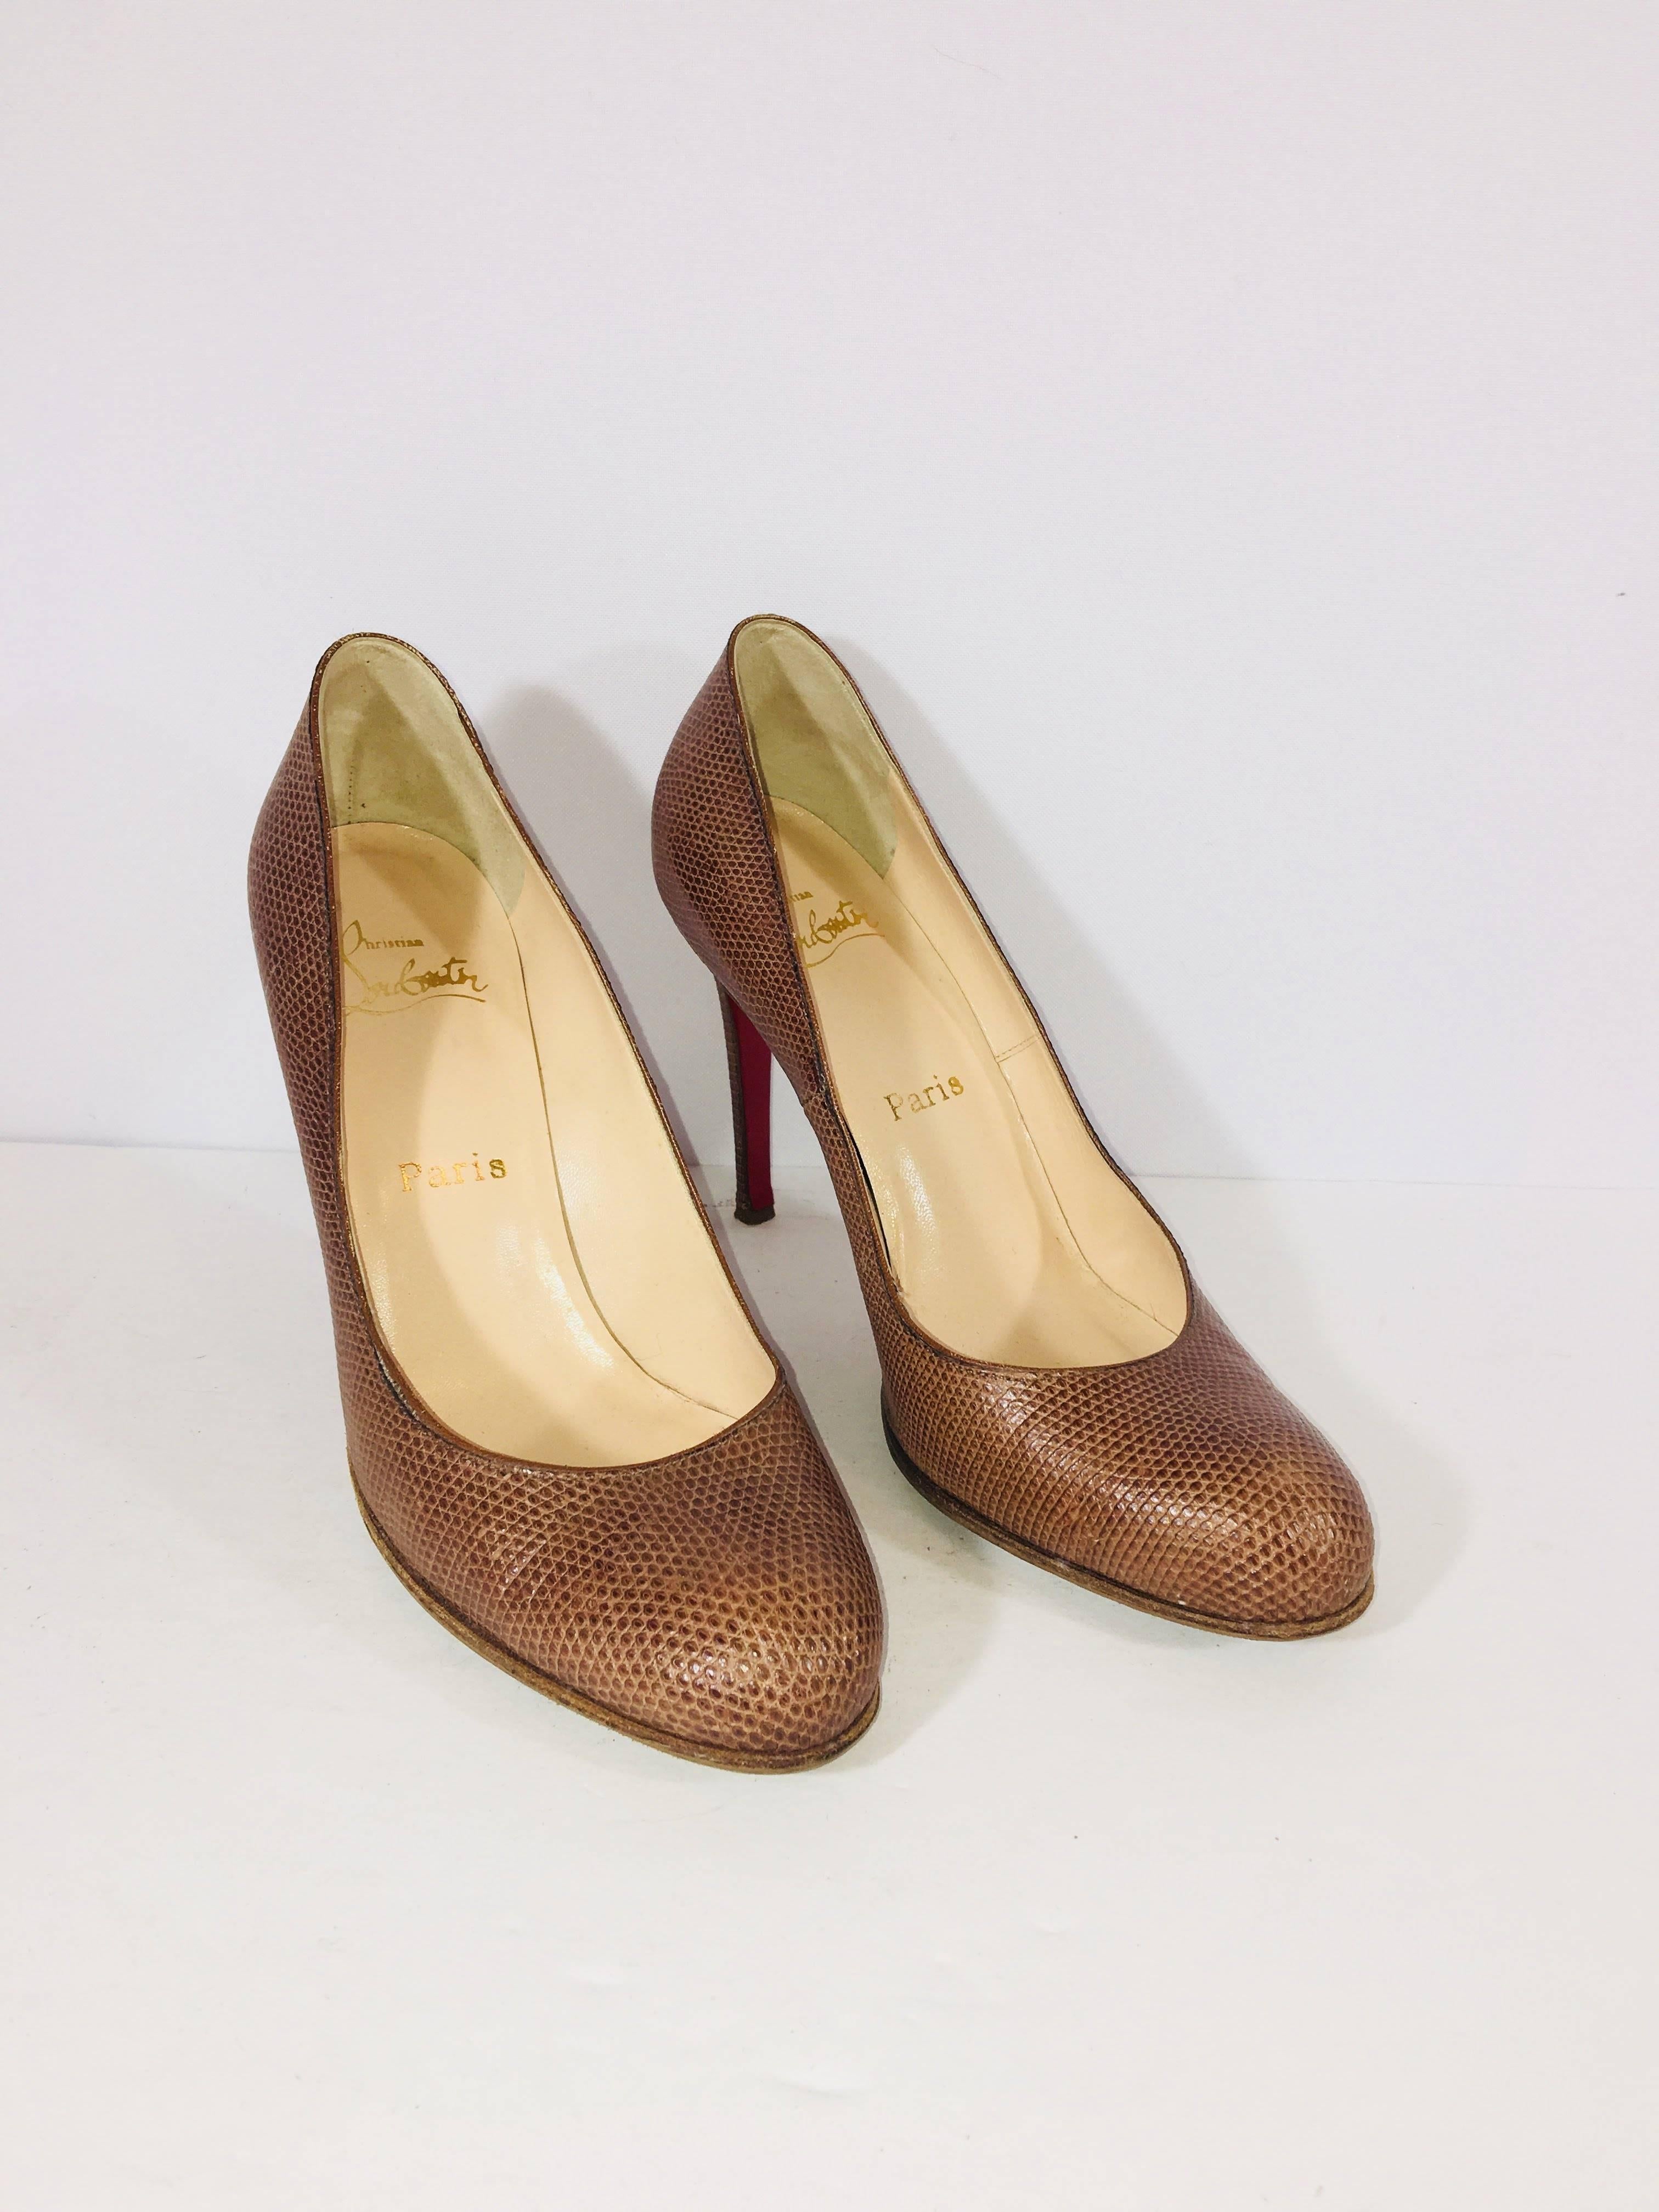 Christian Louboutin Lizard/Snake Texture Brown Leather Round Toe Pumps